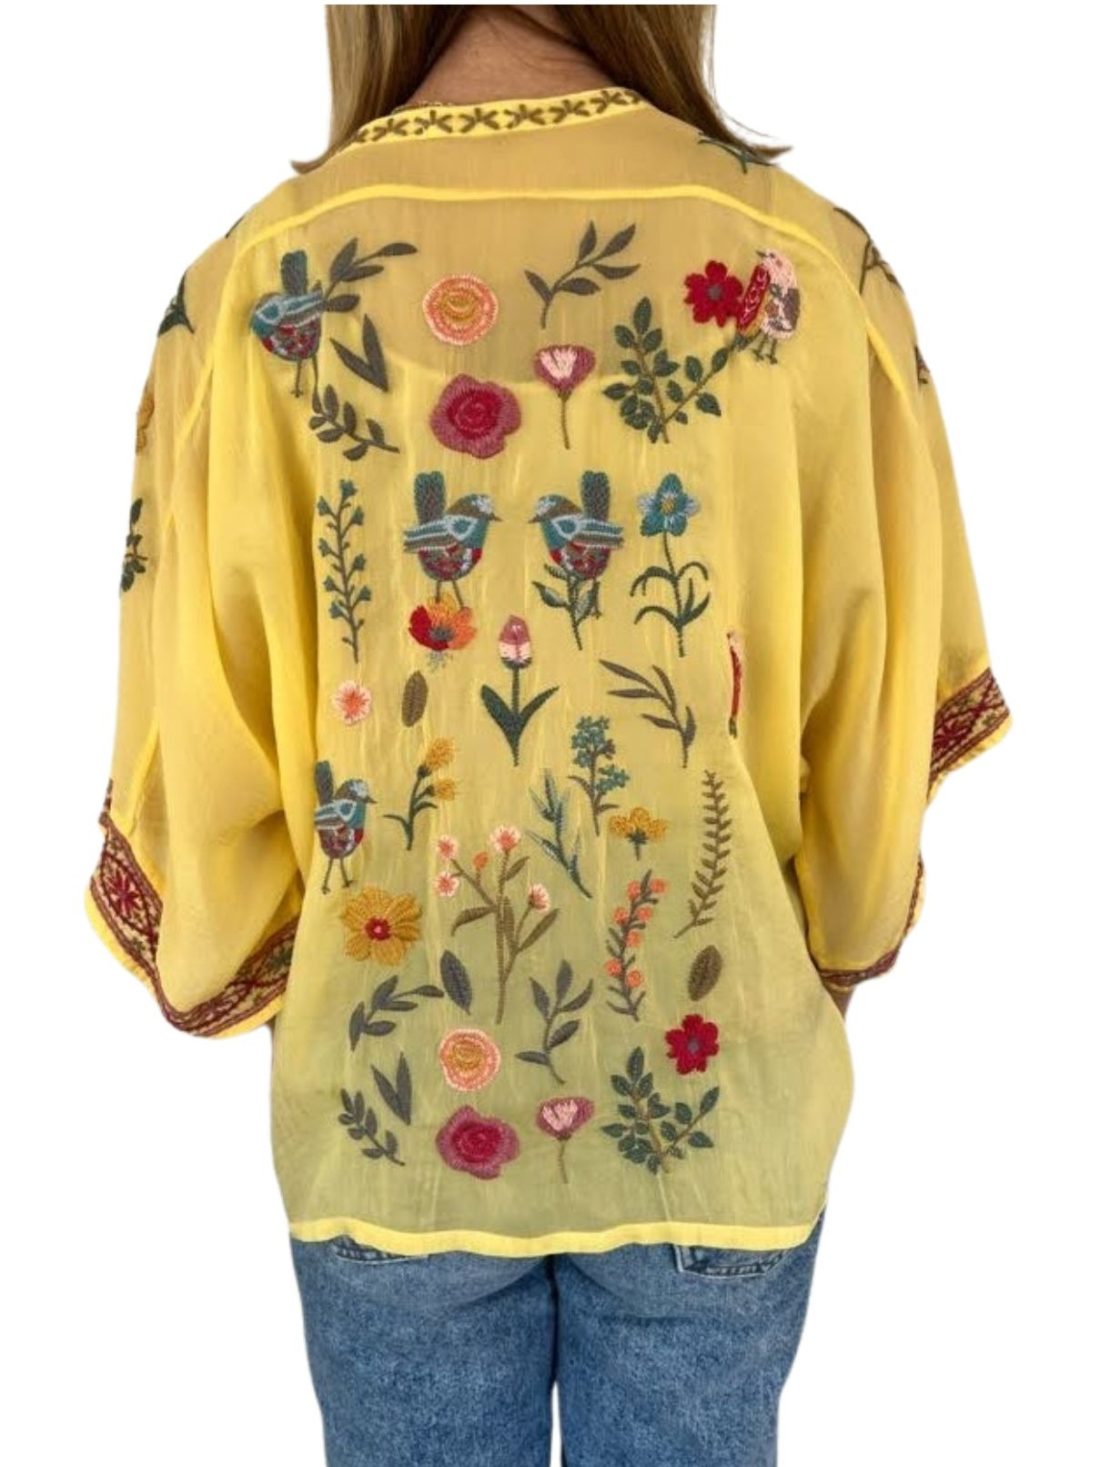 johnny was roylane blouse in soft citron